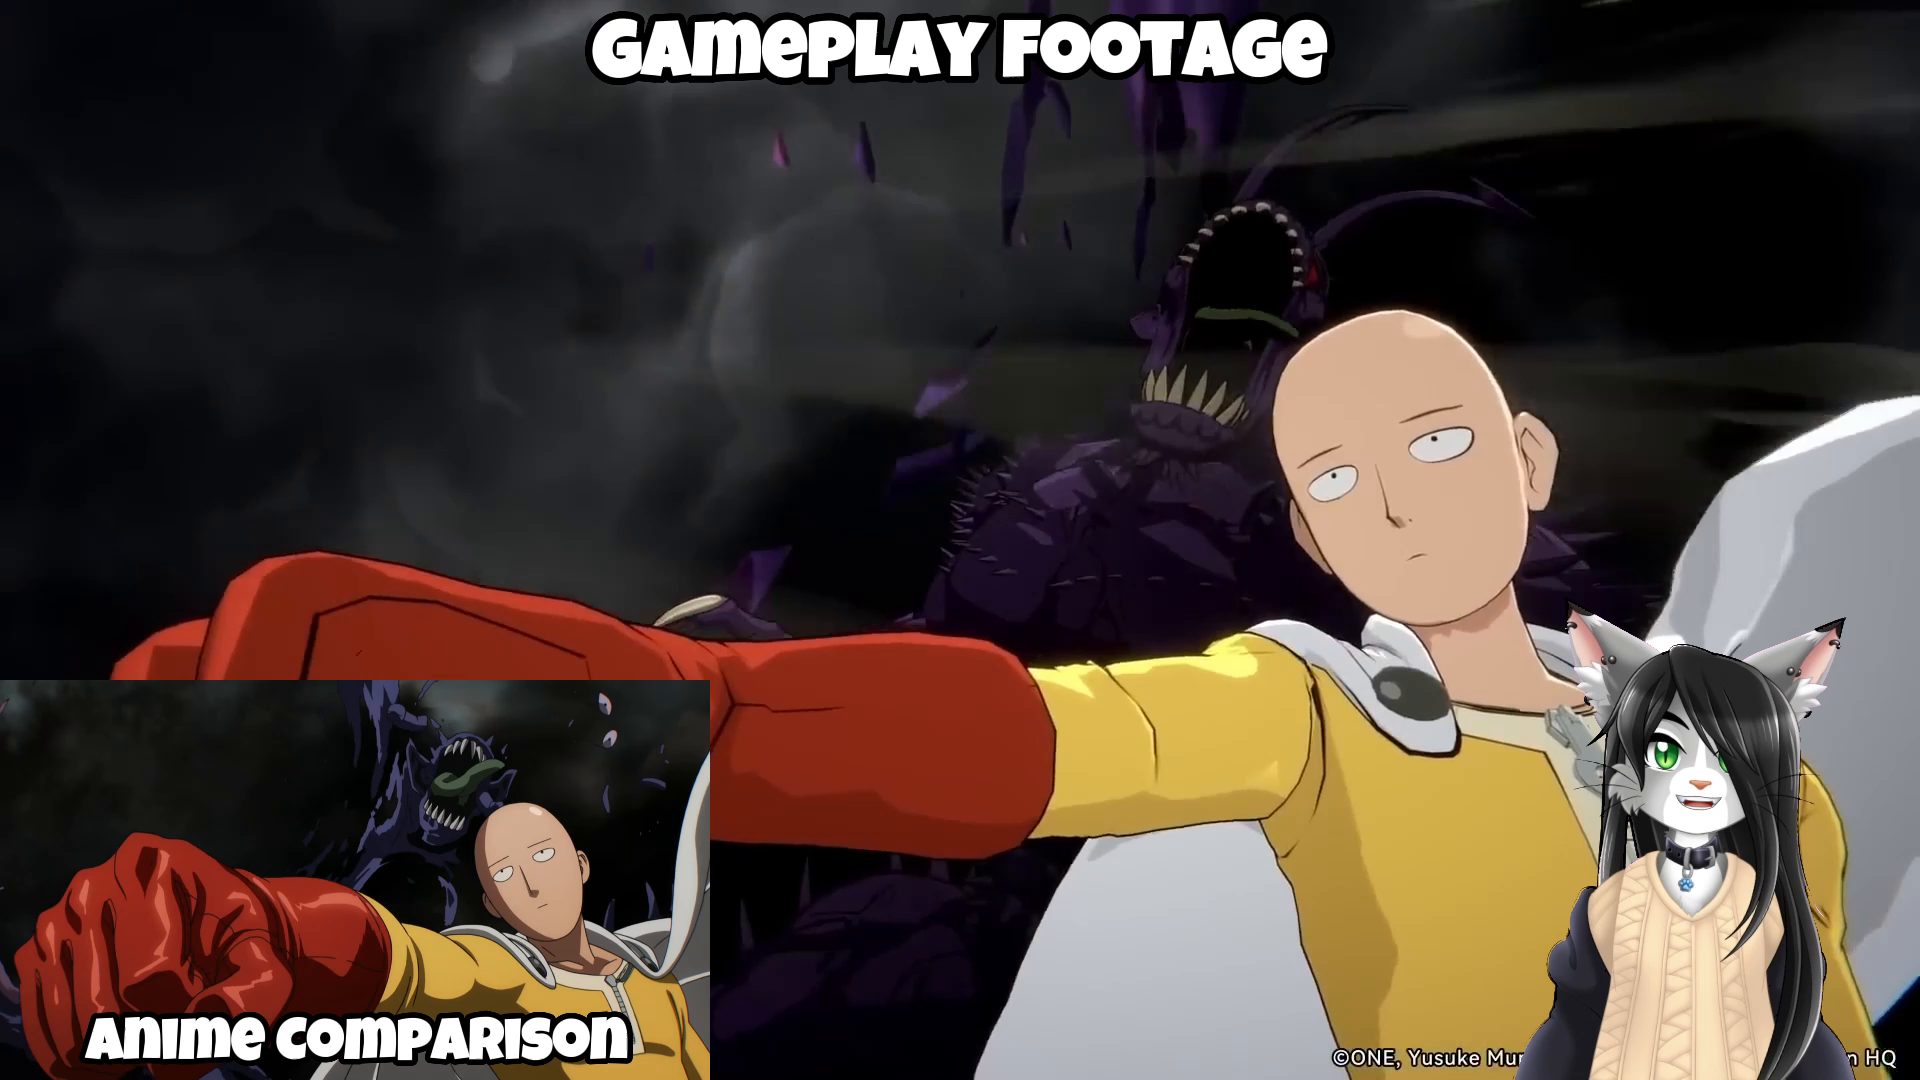 One Punch Man: World - ARPG CBT Gameplay Part 1 (Android/iOS) 